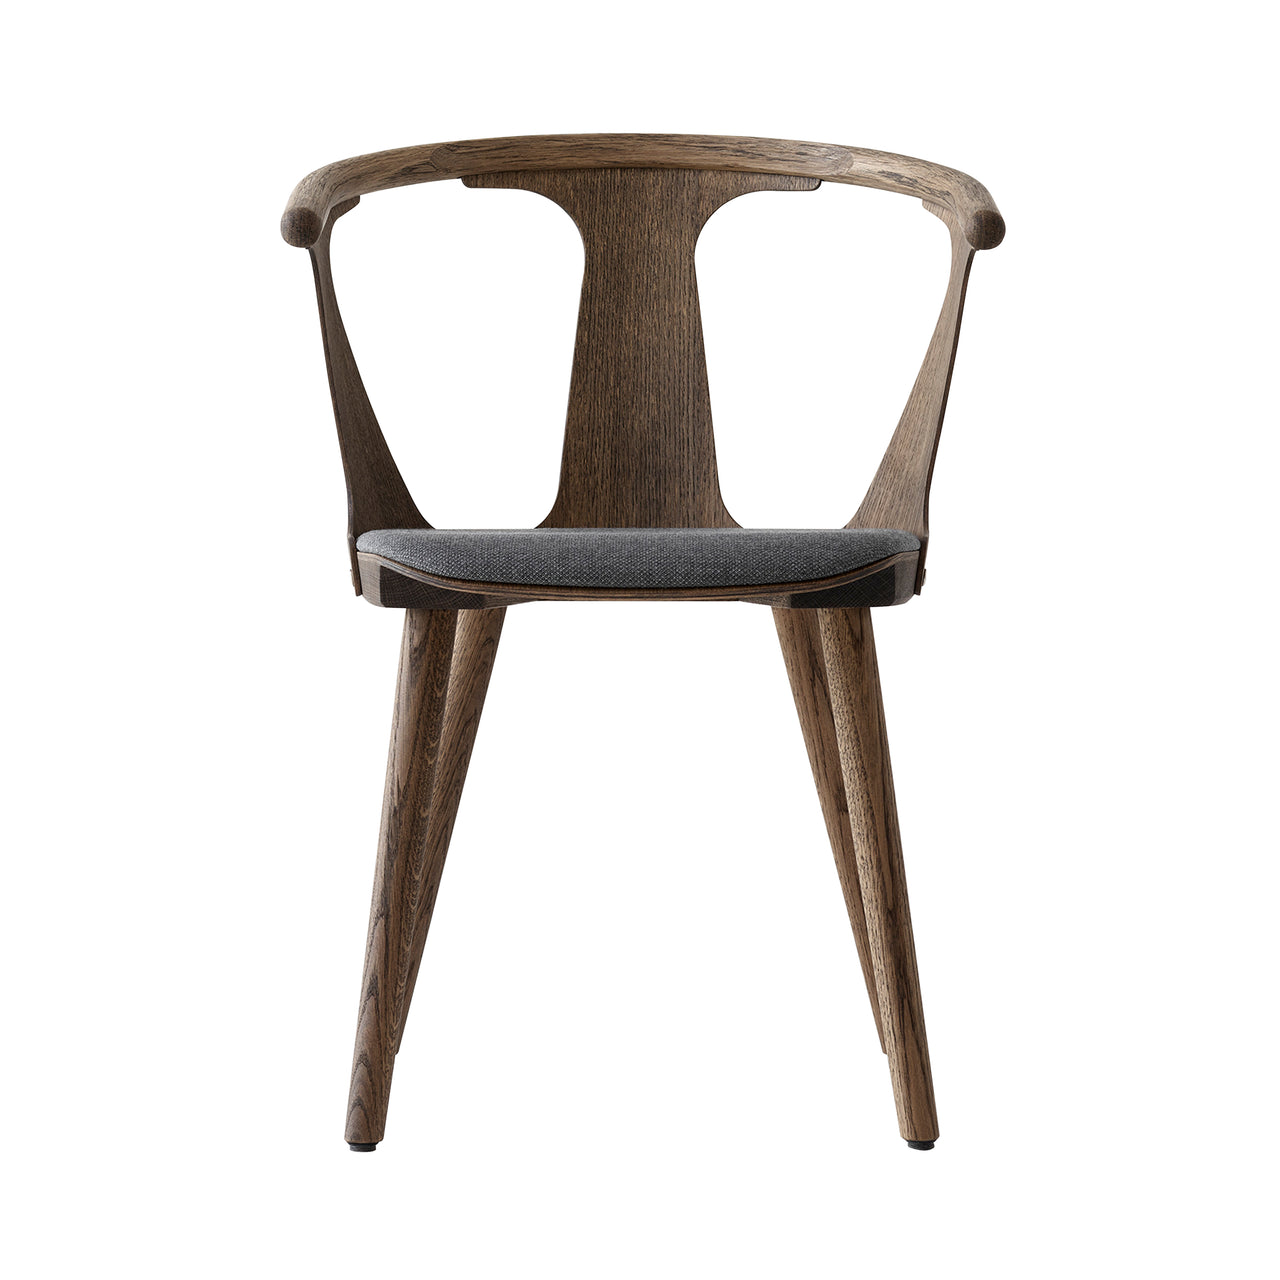 In Between Chair SK2: Upholstered + Smoked Oiled Oak + Fiord 171